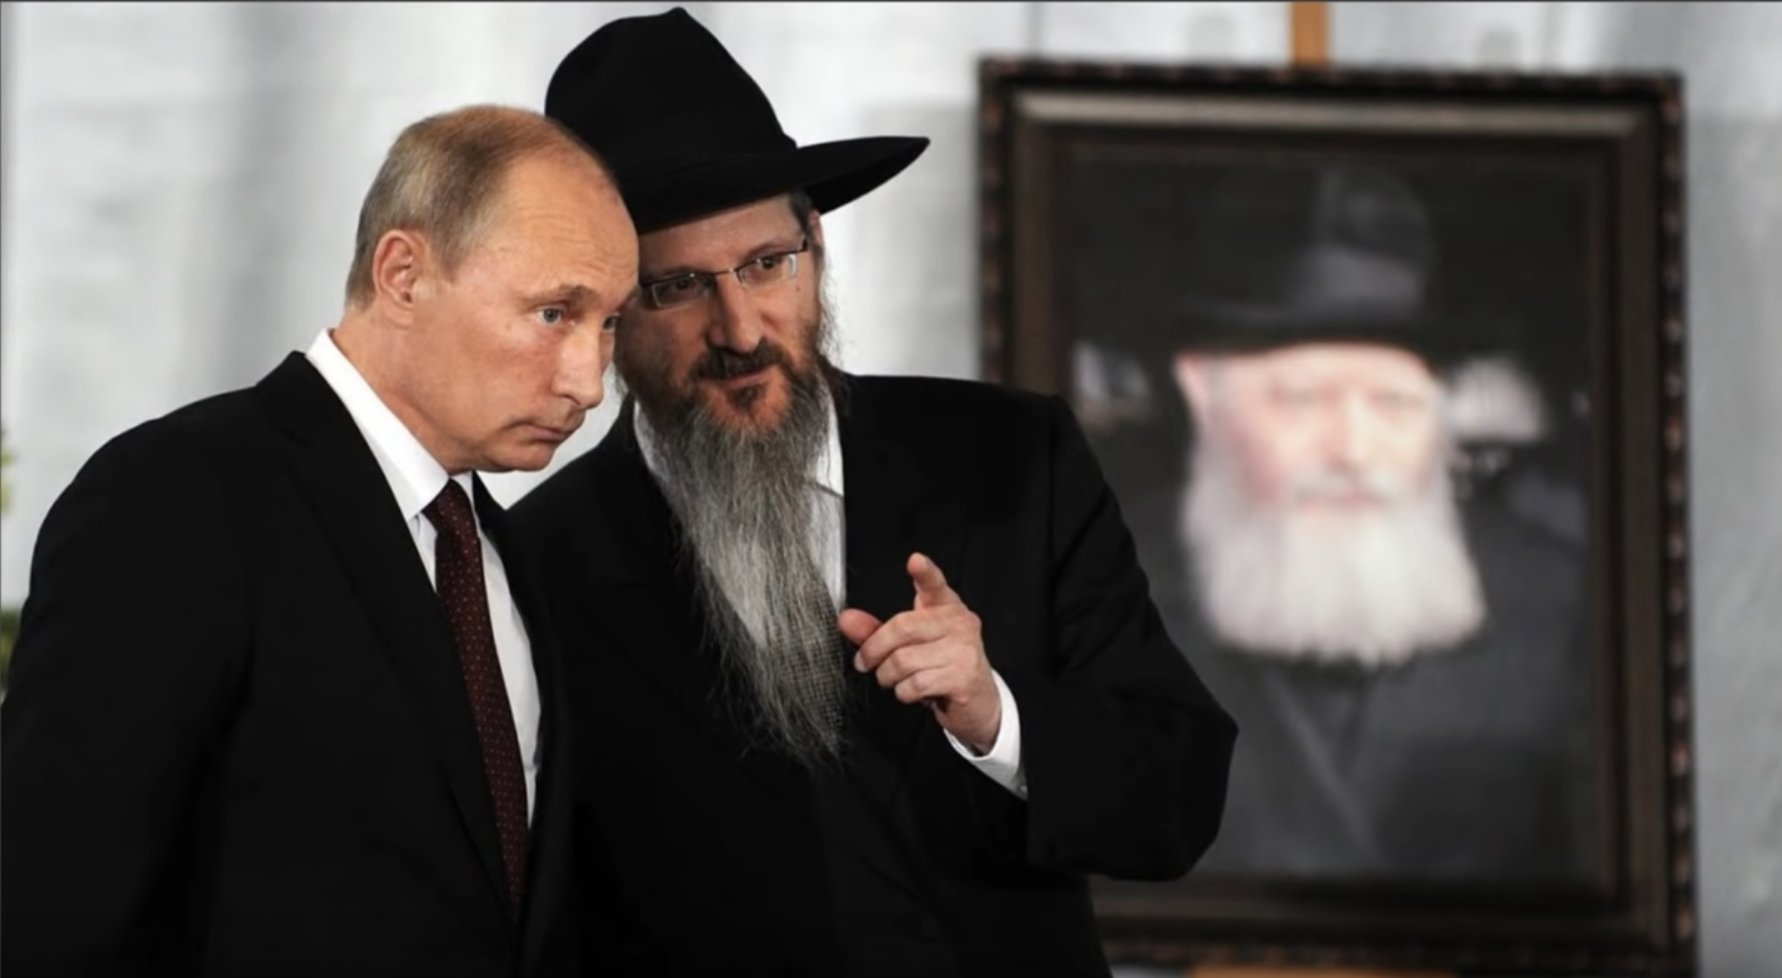 Chabad: The Jewish Supremacist Cult Behind the New World Order